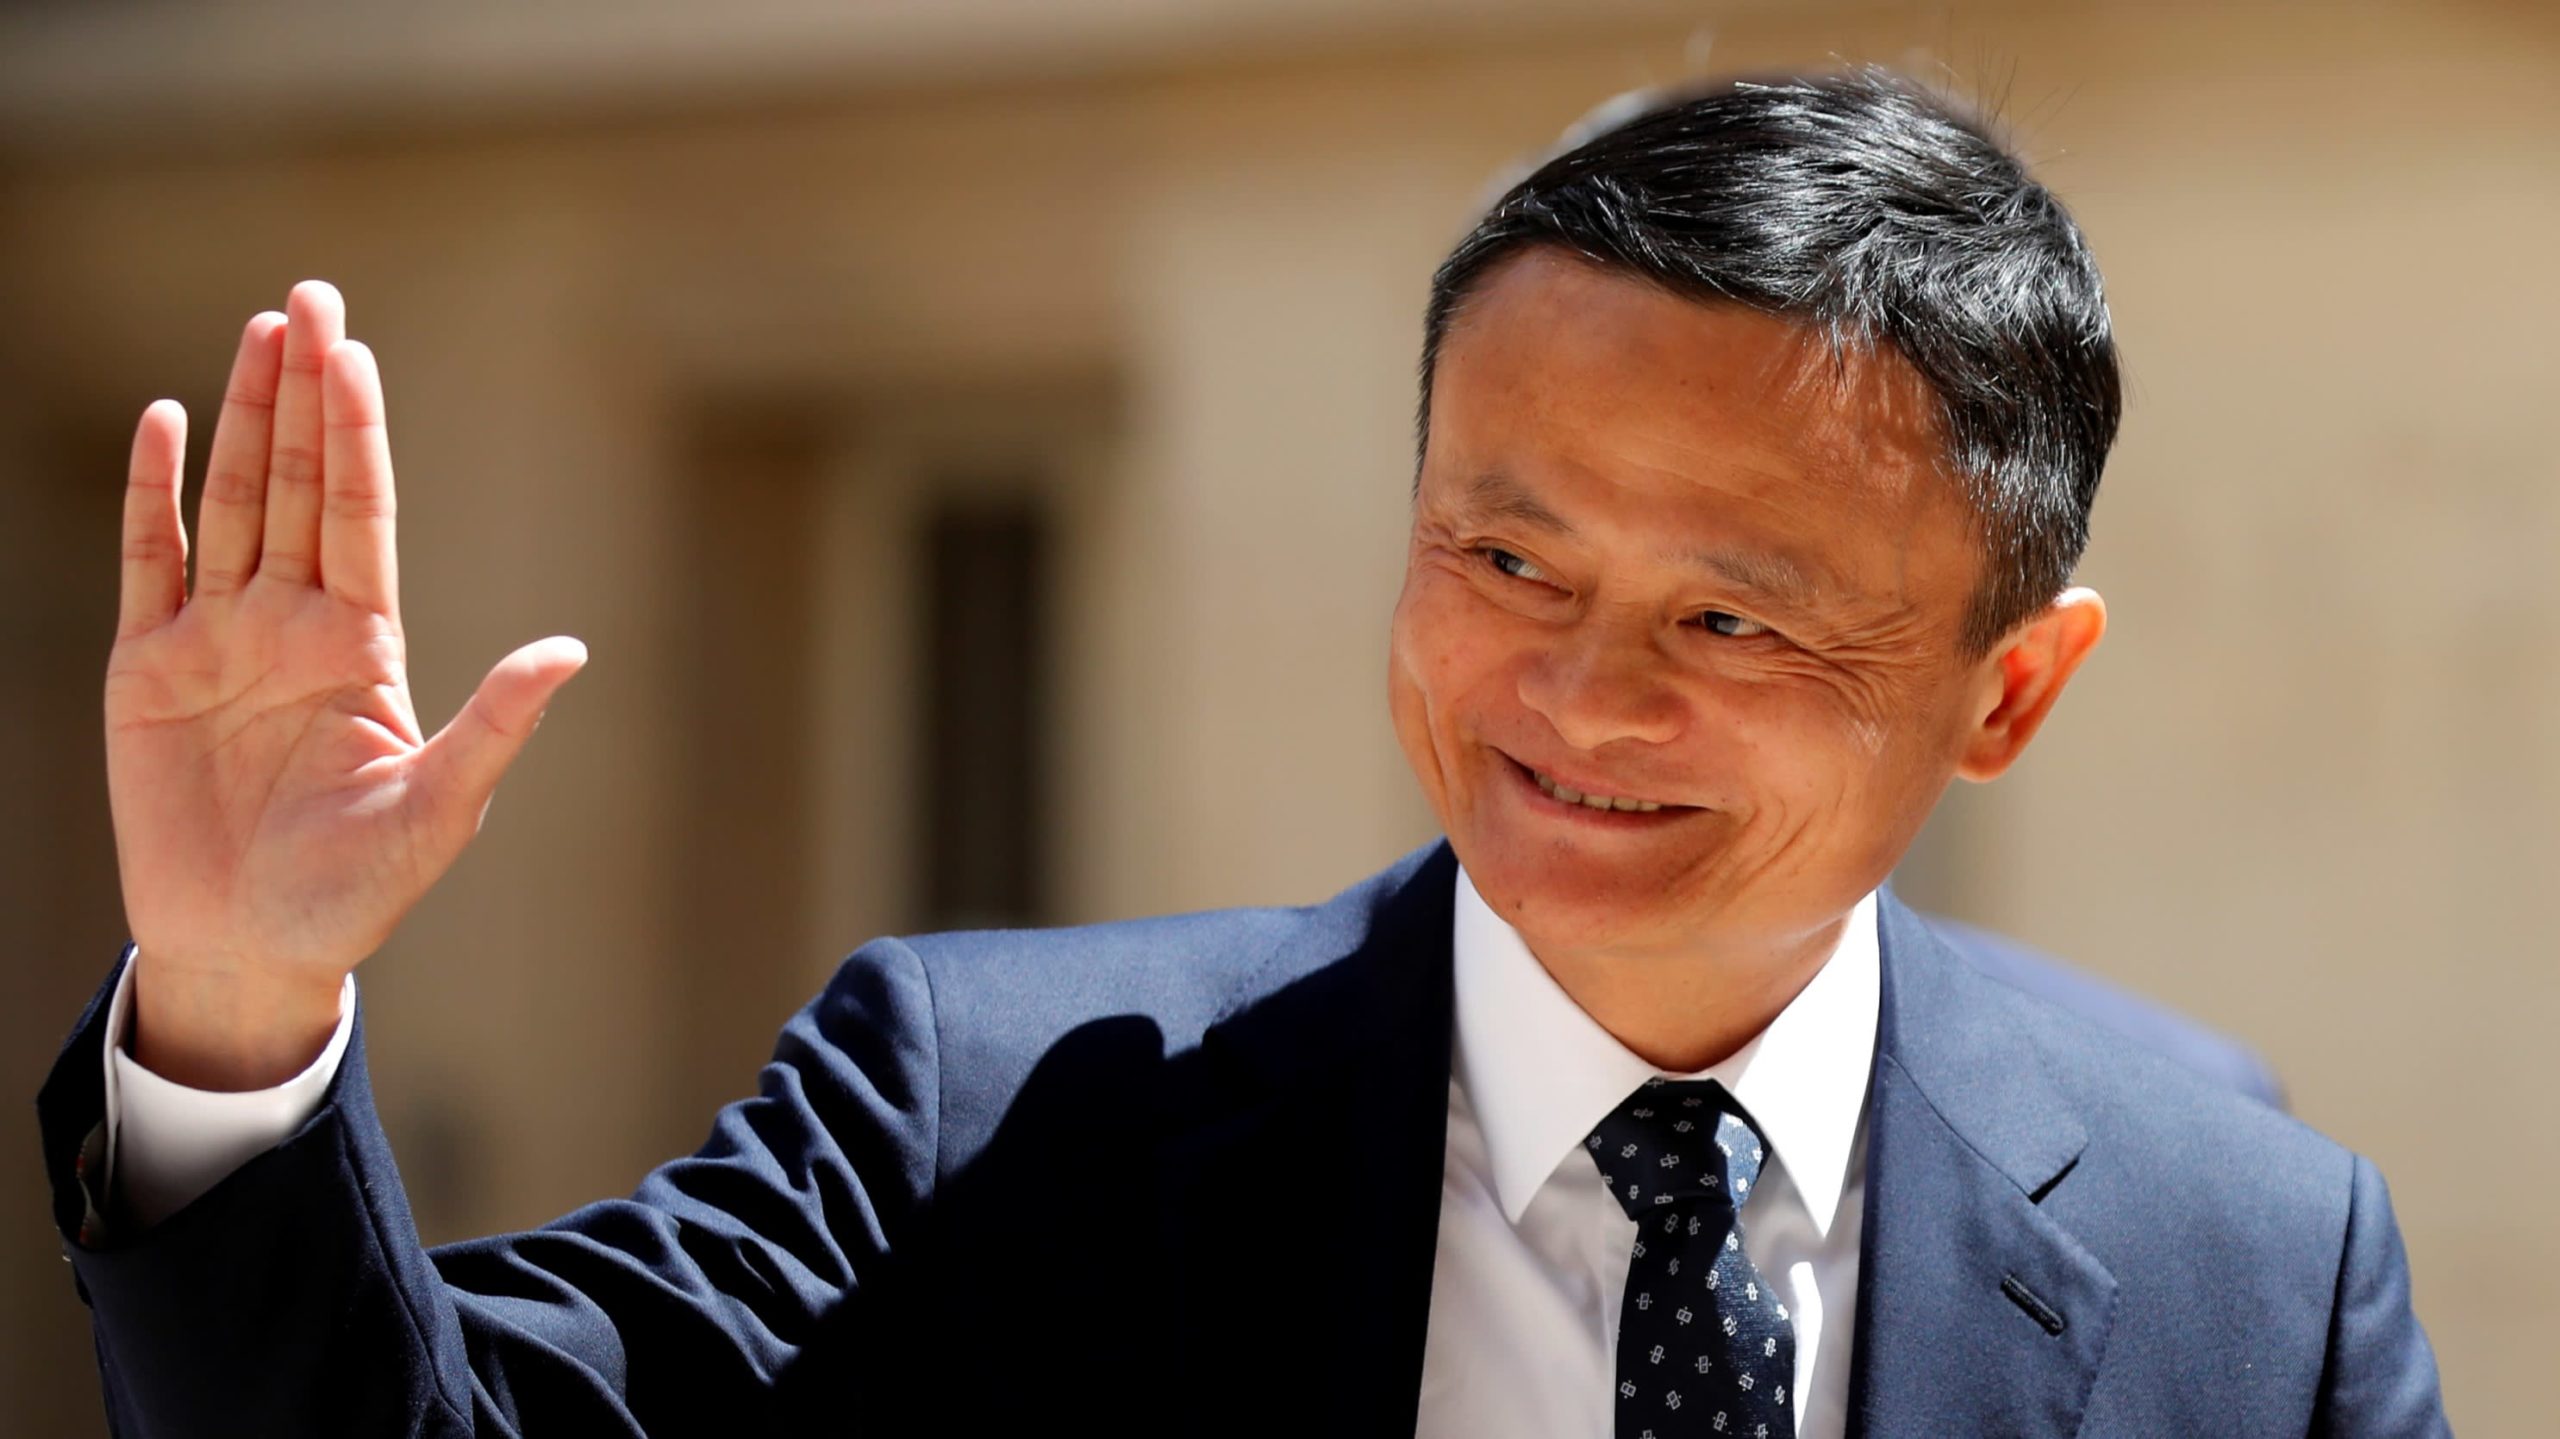 Alibaba Founder Jack Ma: Digital Currencies Can Create Value